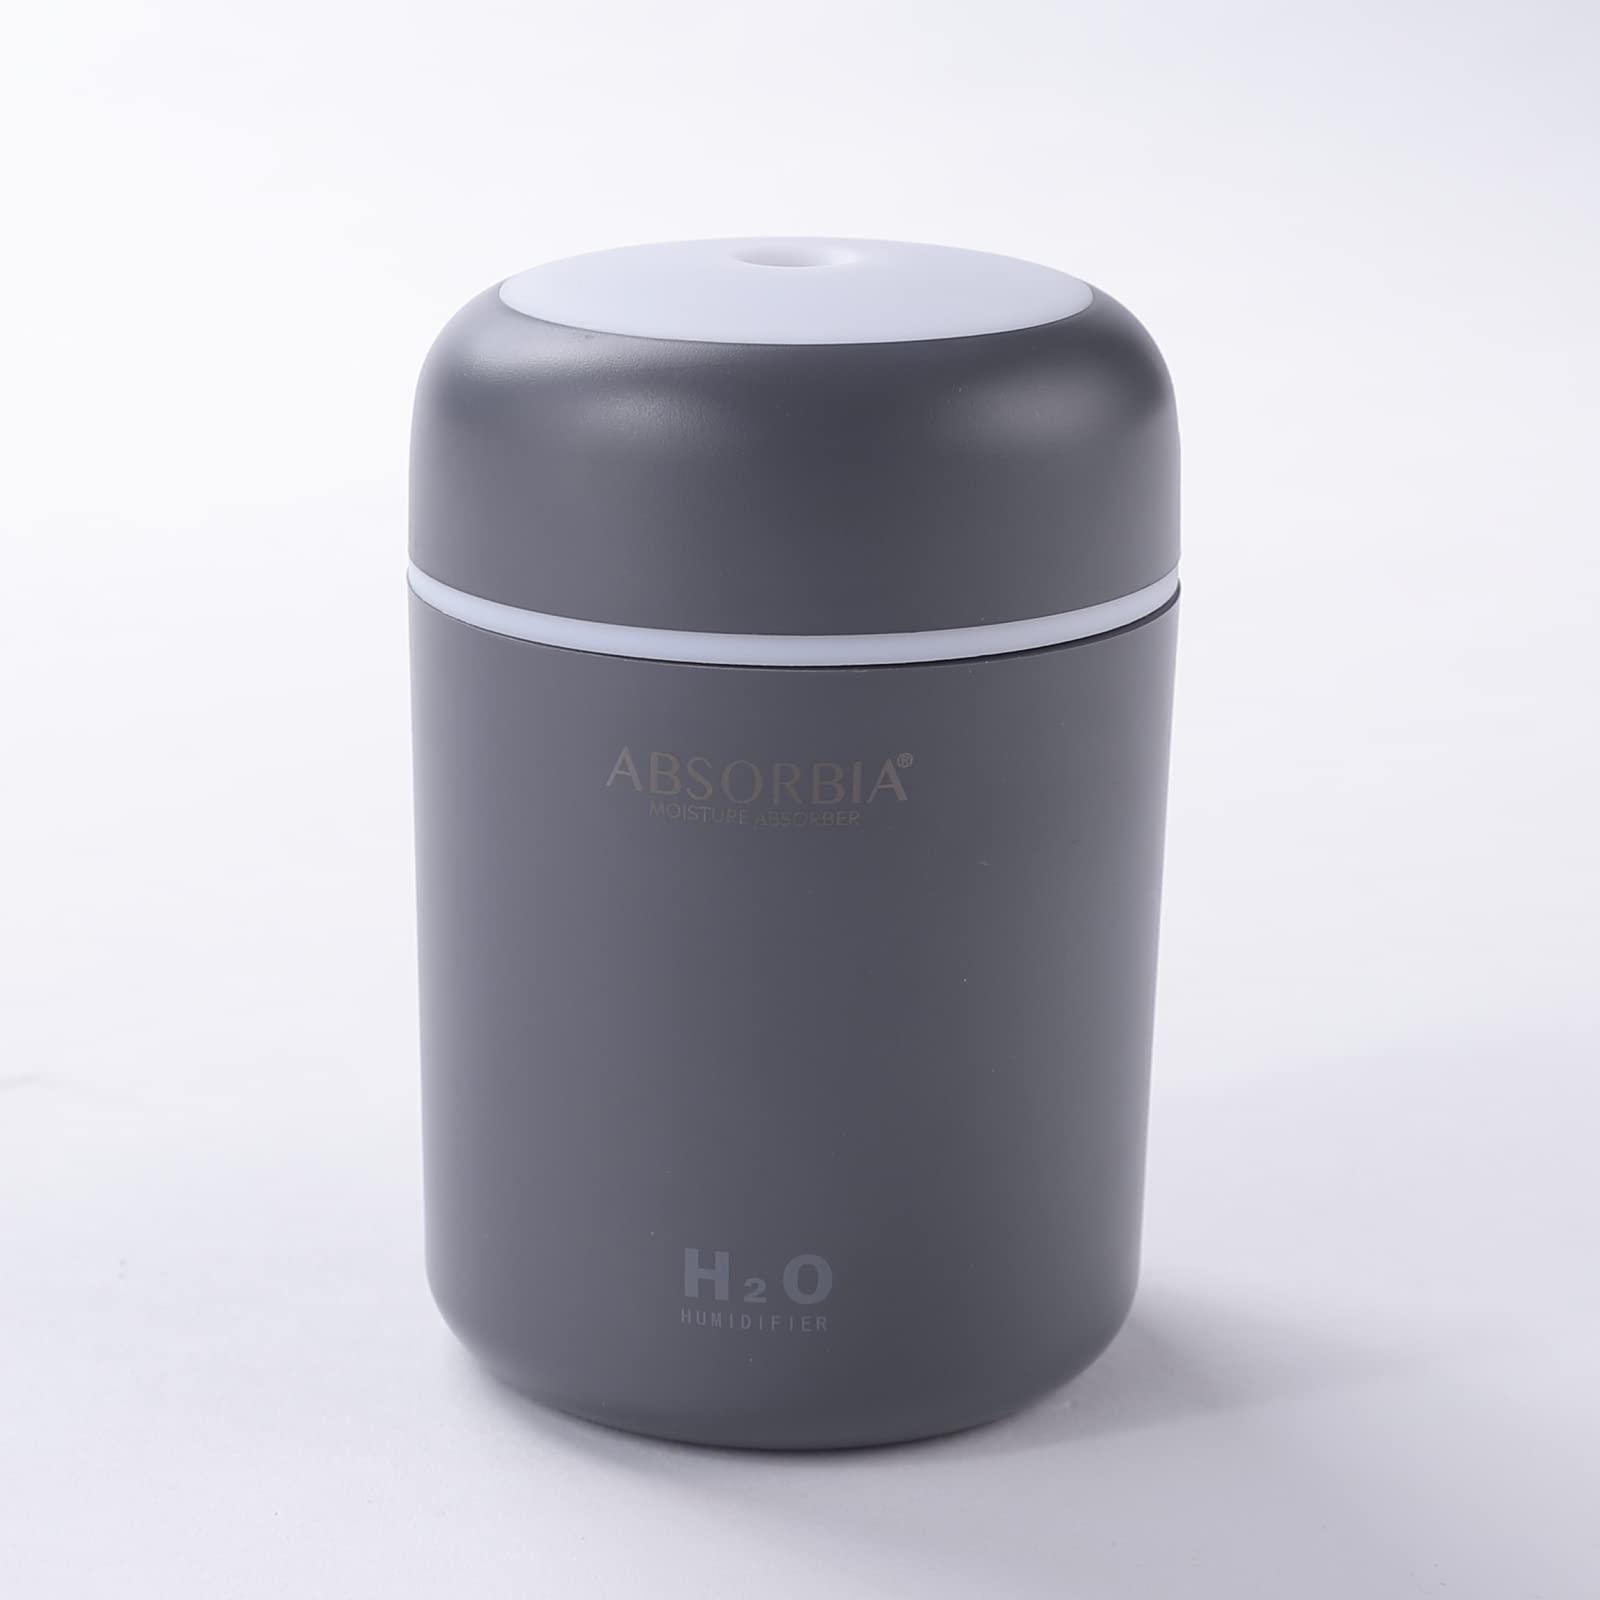 ABSORBIA Multicolour Mini Humidifier - 300ml Auto Shut off - Silent Operation - Grey - for Office, Car and Room